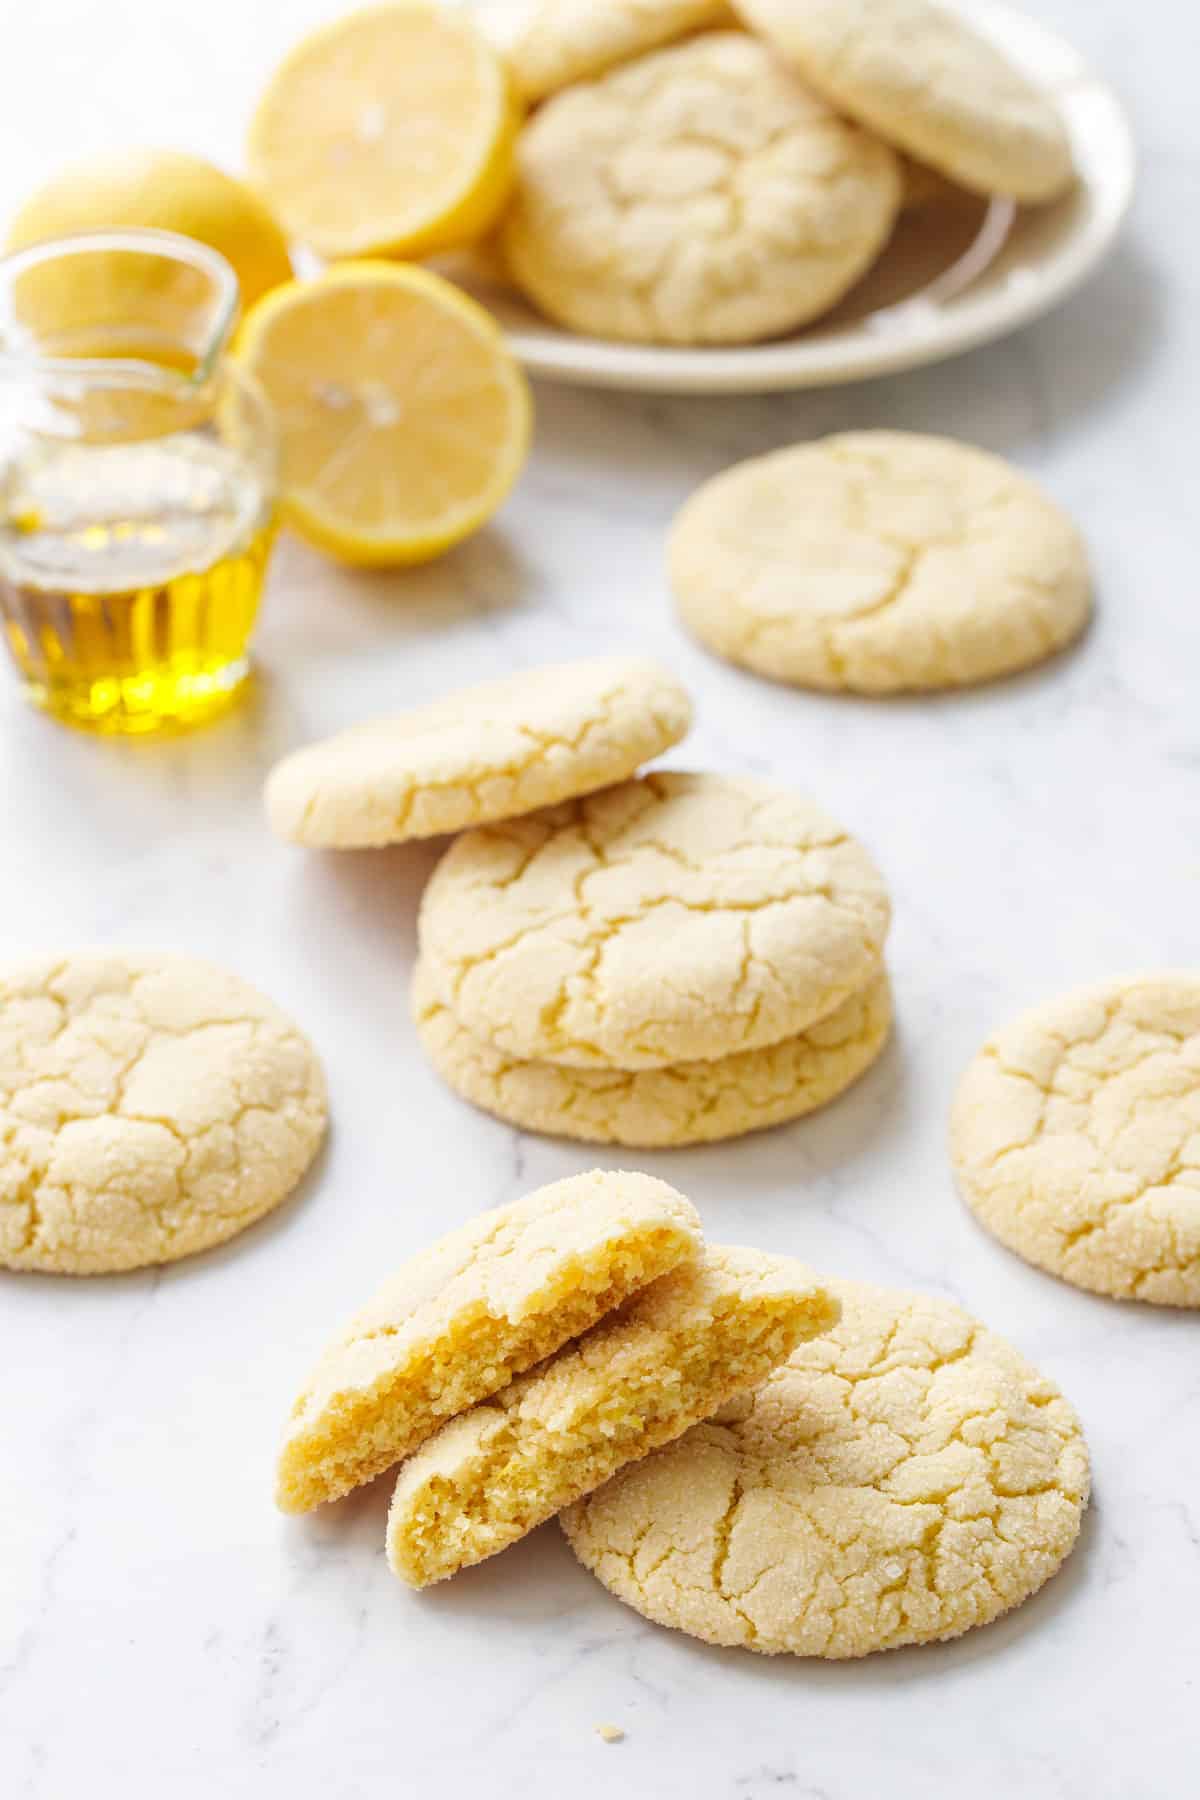 Scattered Lemon Olive Oil Sugar Cookies on a marble background with lemons, glass dish of olive oil and plate of cookies in the background.